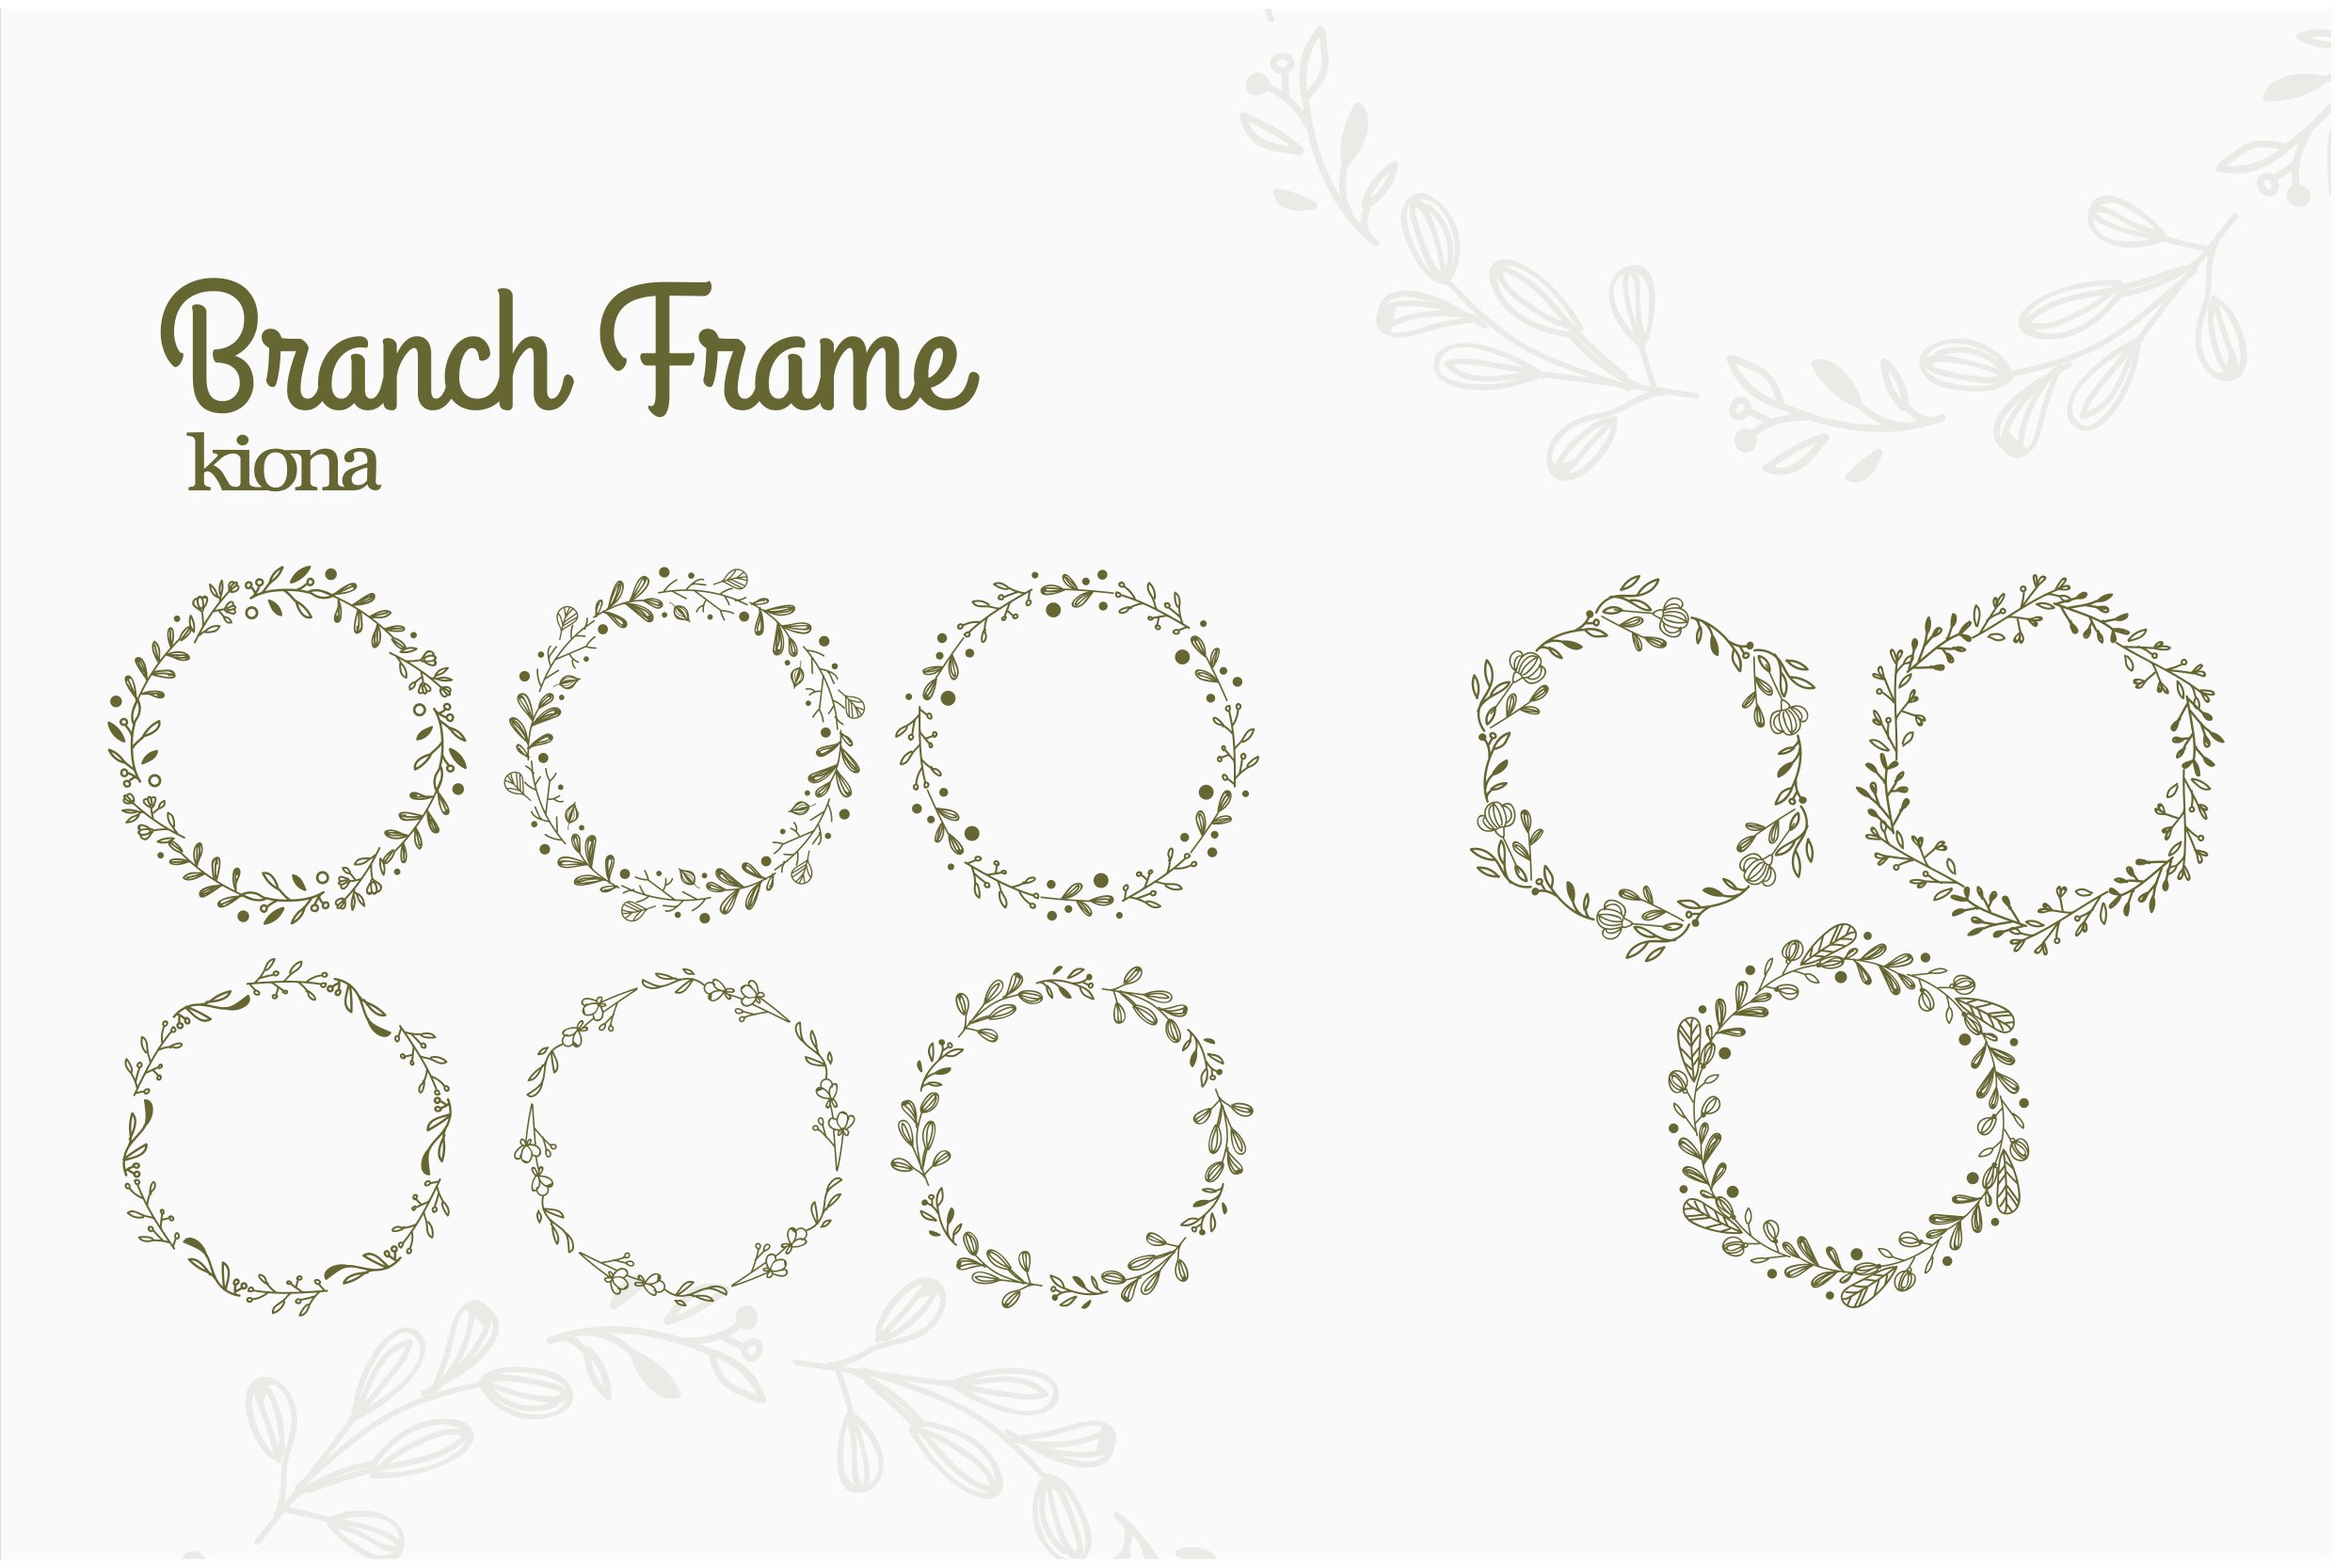 Bunch of circular frames with leaves on them.